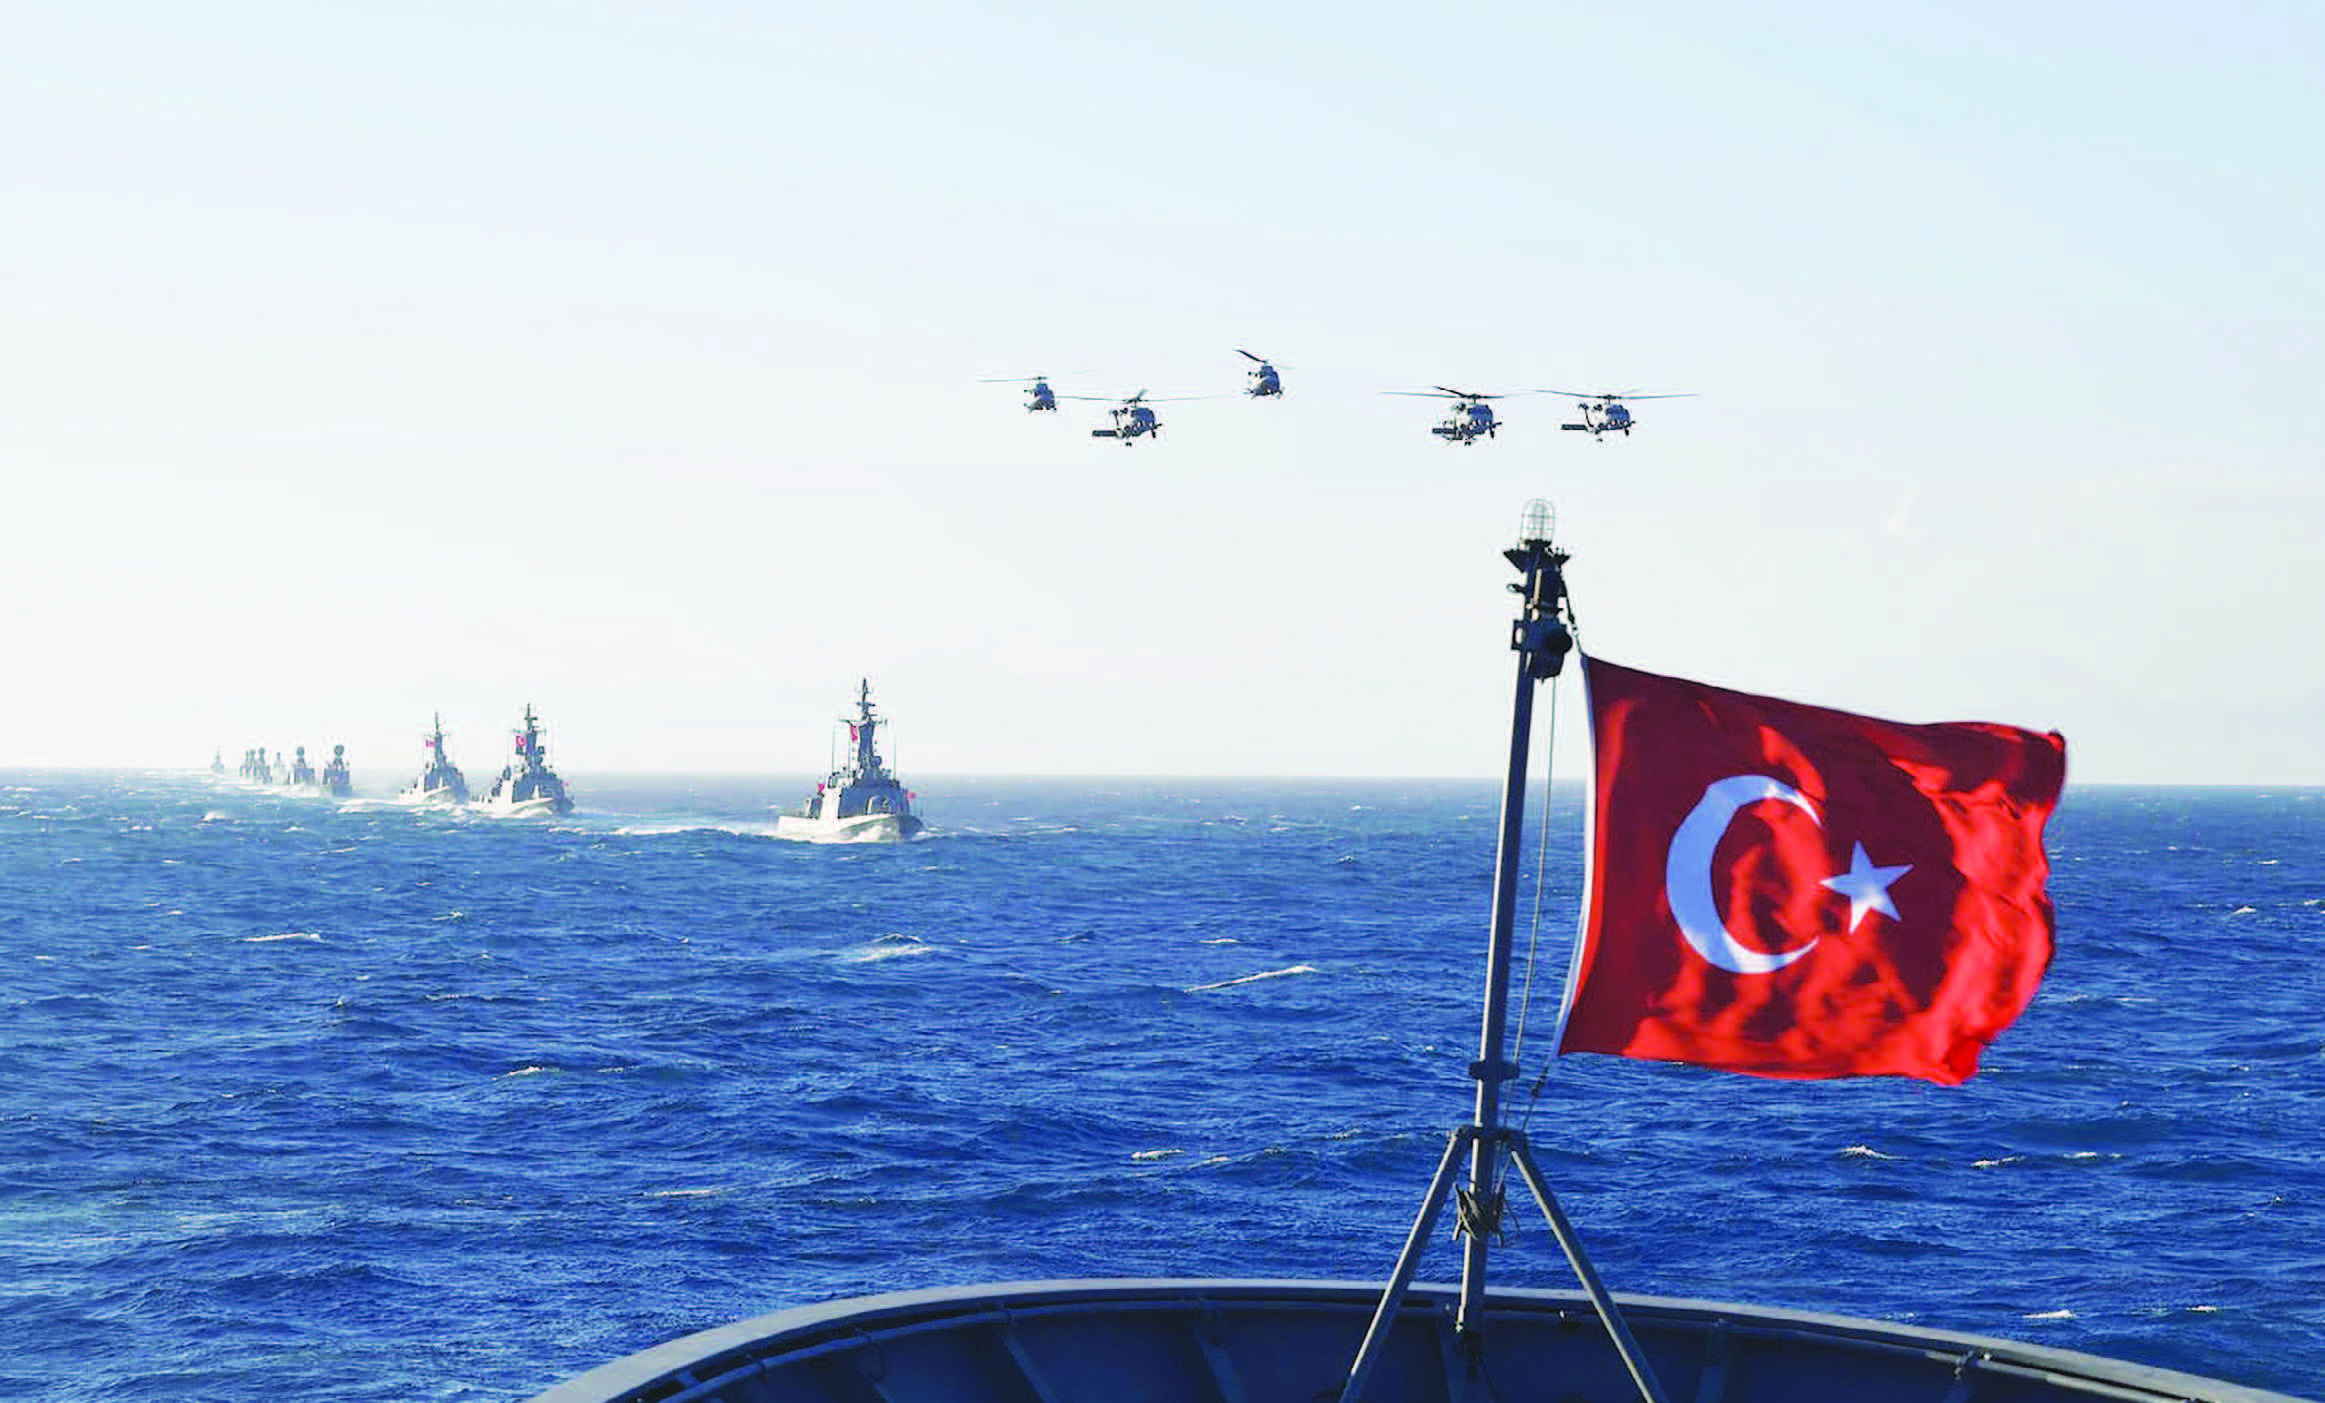 Turkey’s naval exercise called ‘Blue Homeland 2019’ launched on 27 February till 3rd of March.